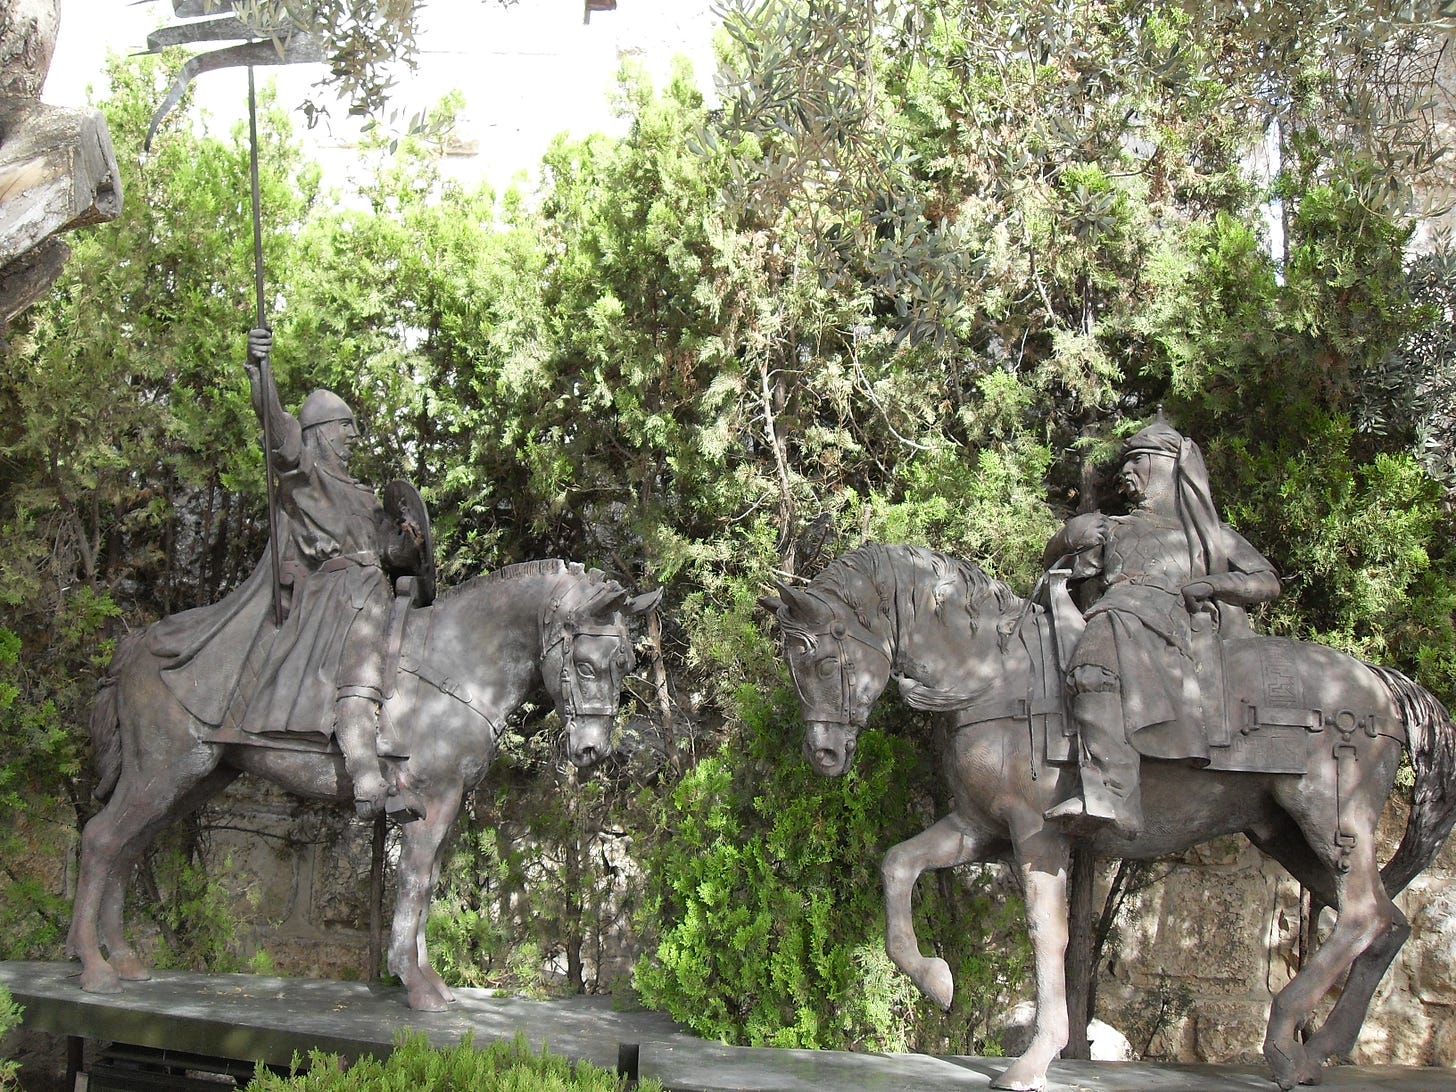 This sculpture in the Old City of Jerusalem seems to depict a purely fictional meeting between Richard and Saladin (Djampa via Wikimedia Commons)